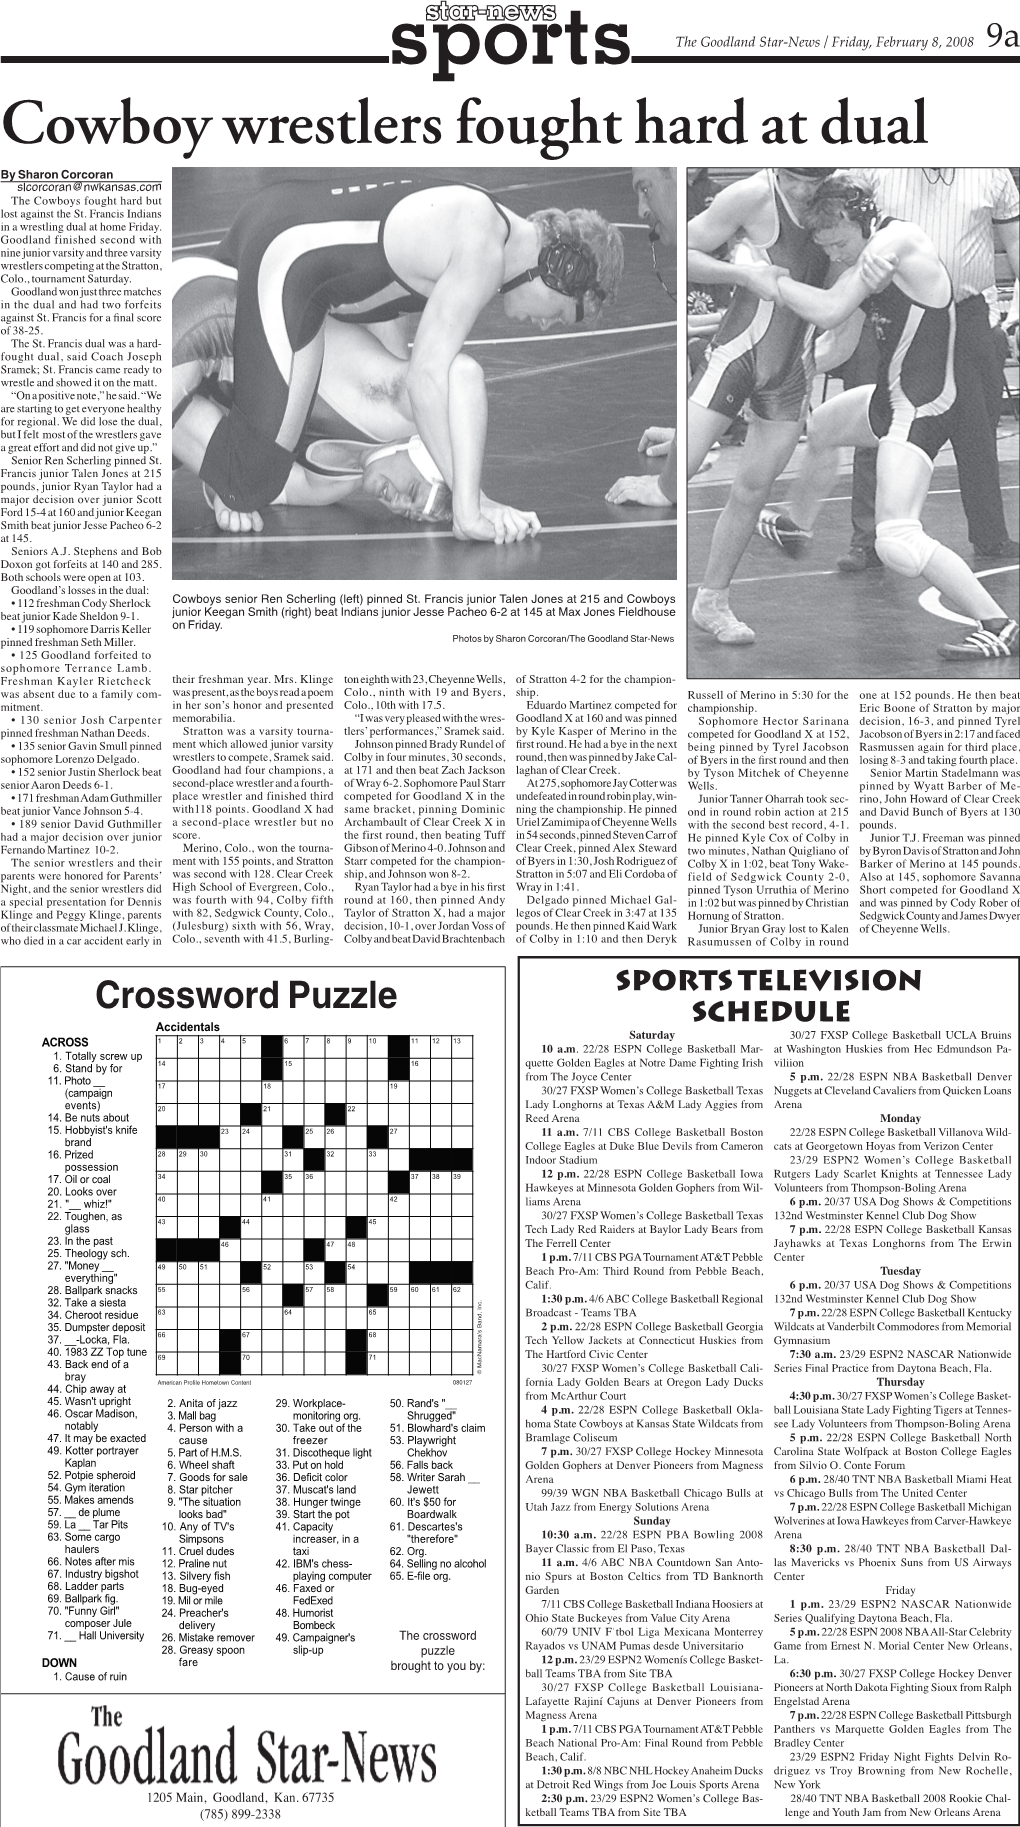 Sports Pg 9A 2/8.Indd